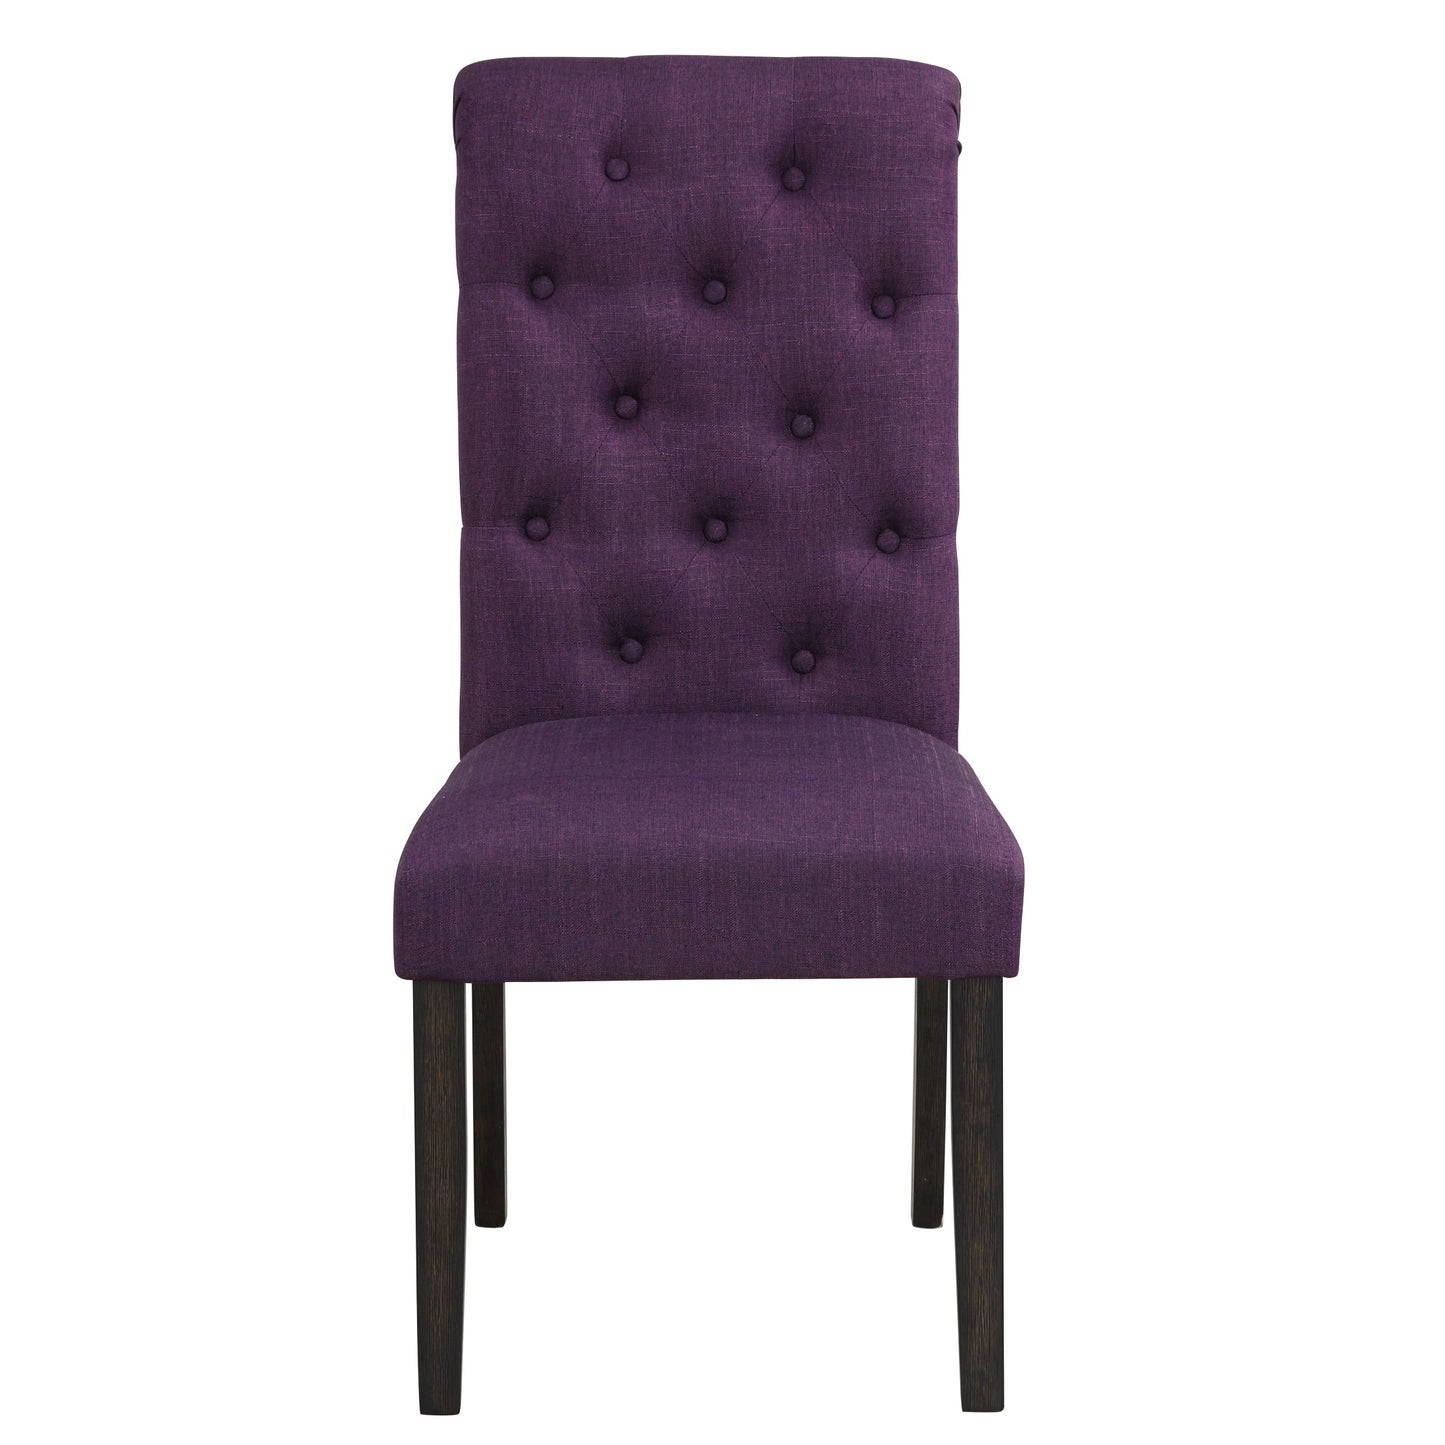 Leviton Solid Wood Tufted Asons Dining Chair, Set of 2, Purple